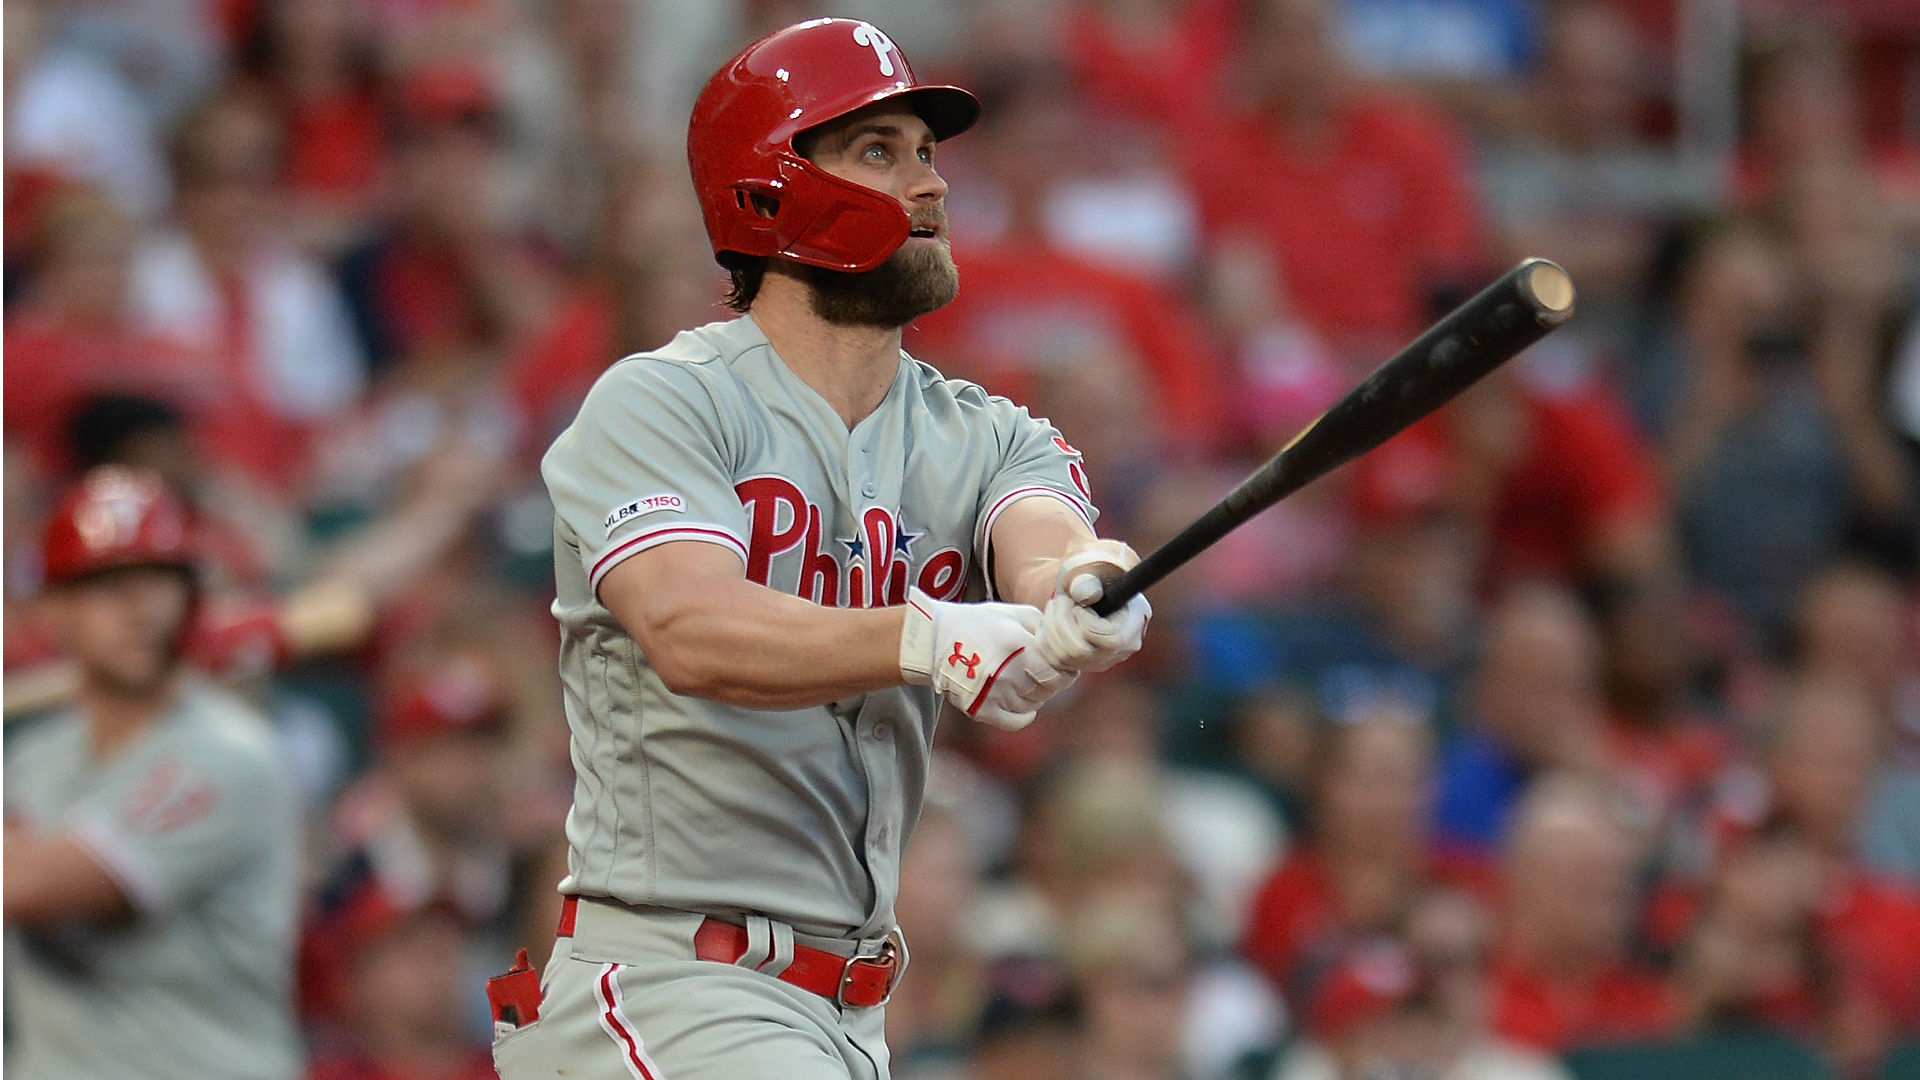 The Phillies and Nationals opened a four-game series Tuesday, with Bryce Harper returning to the city where he began his career.